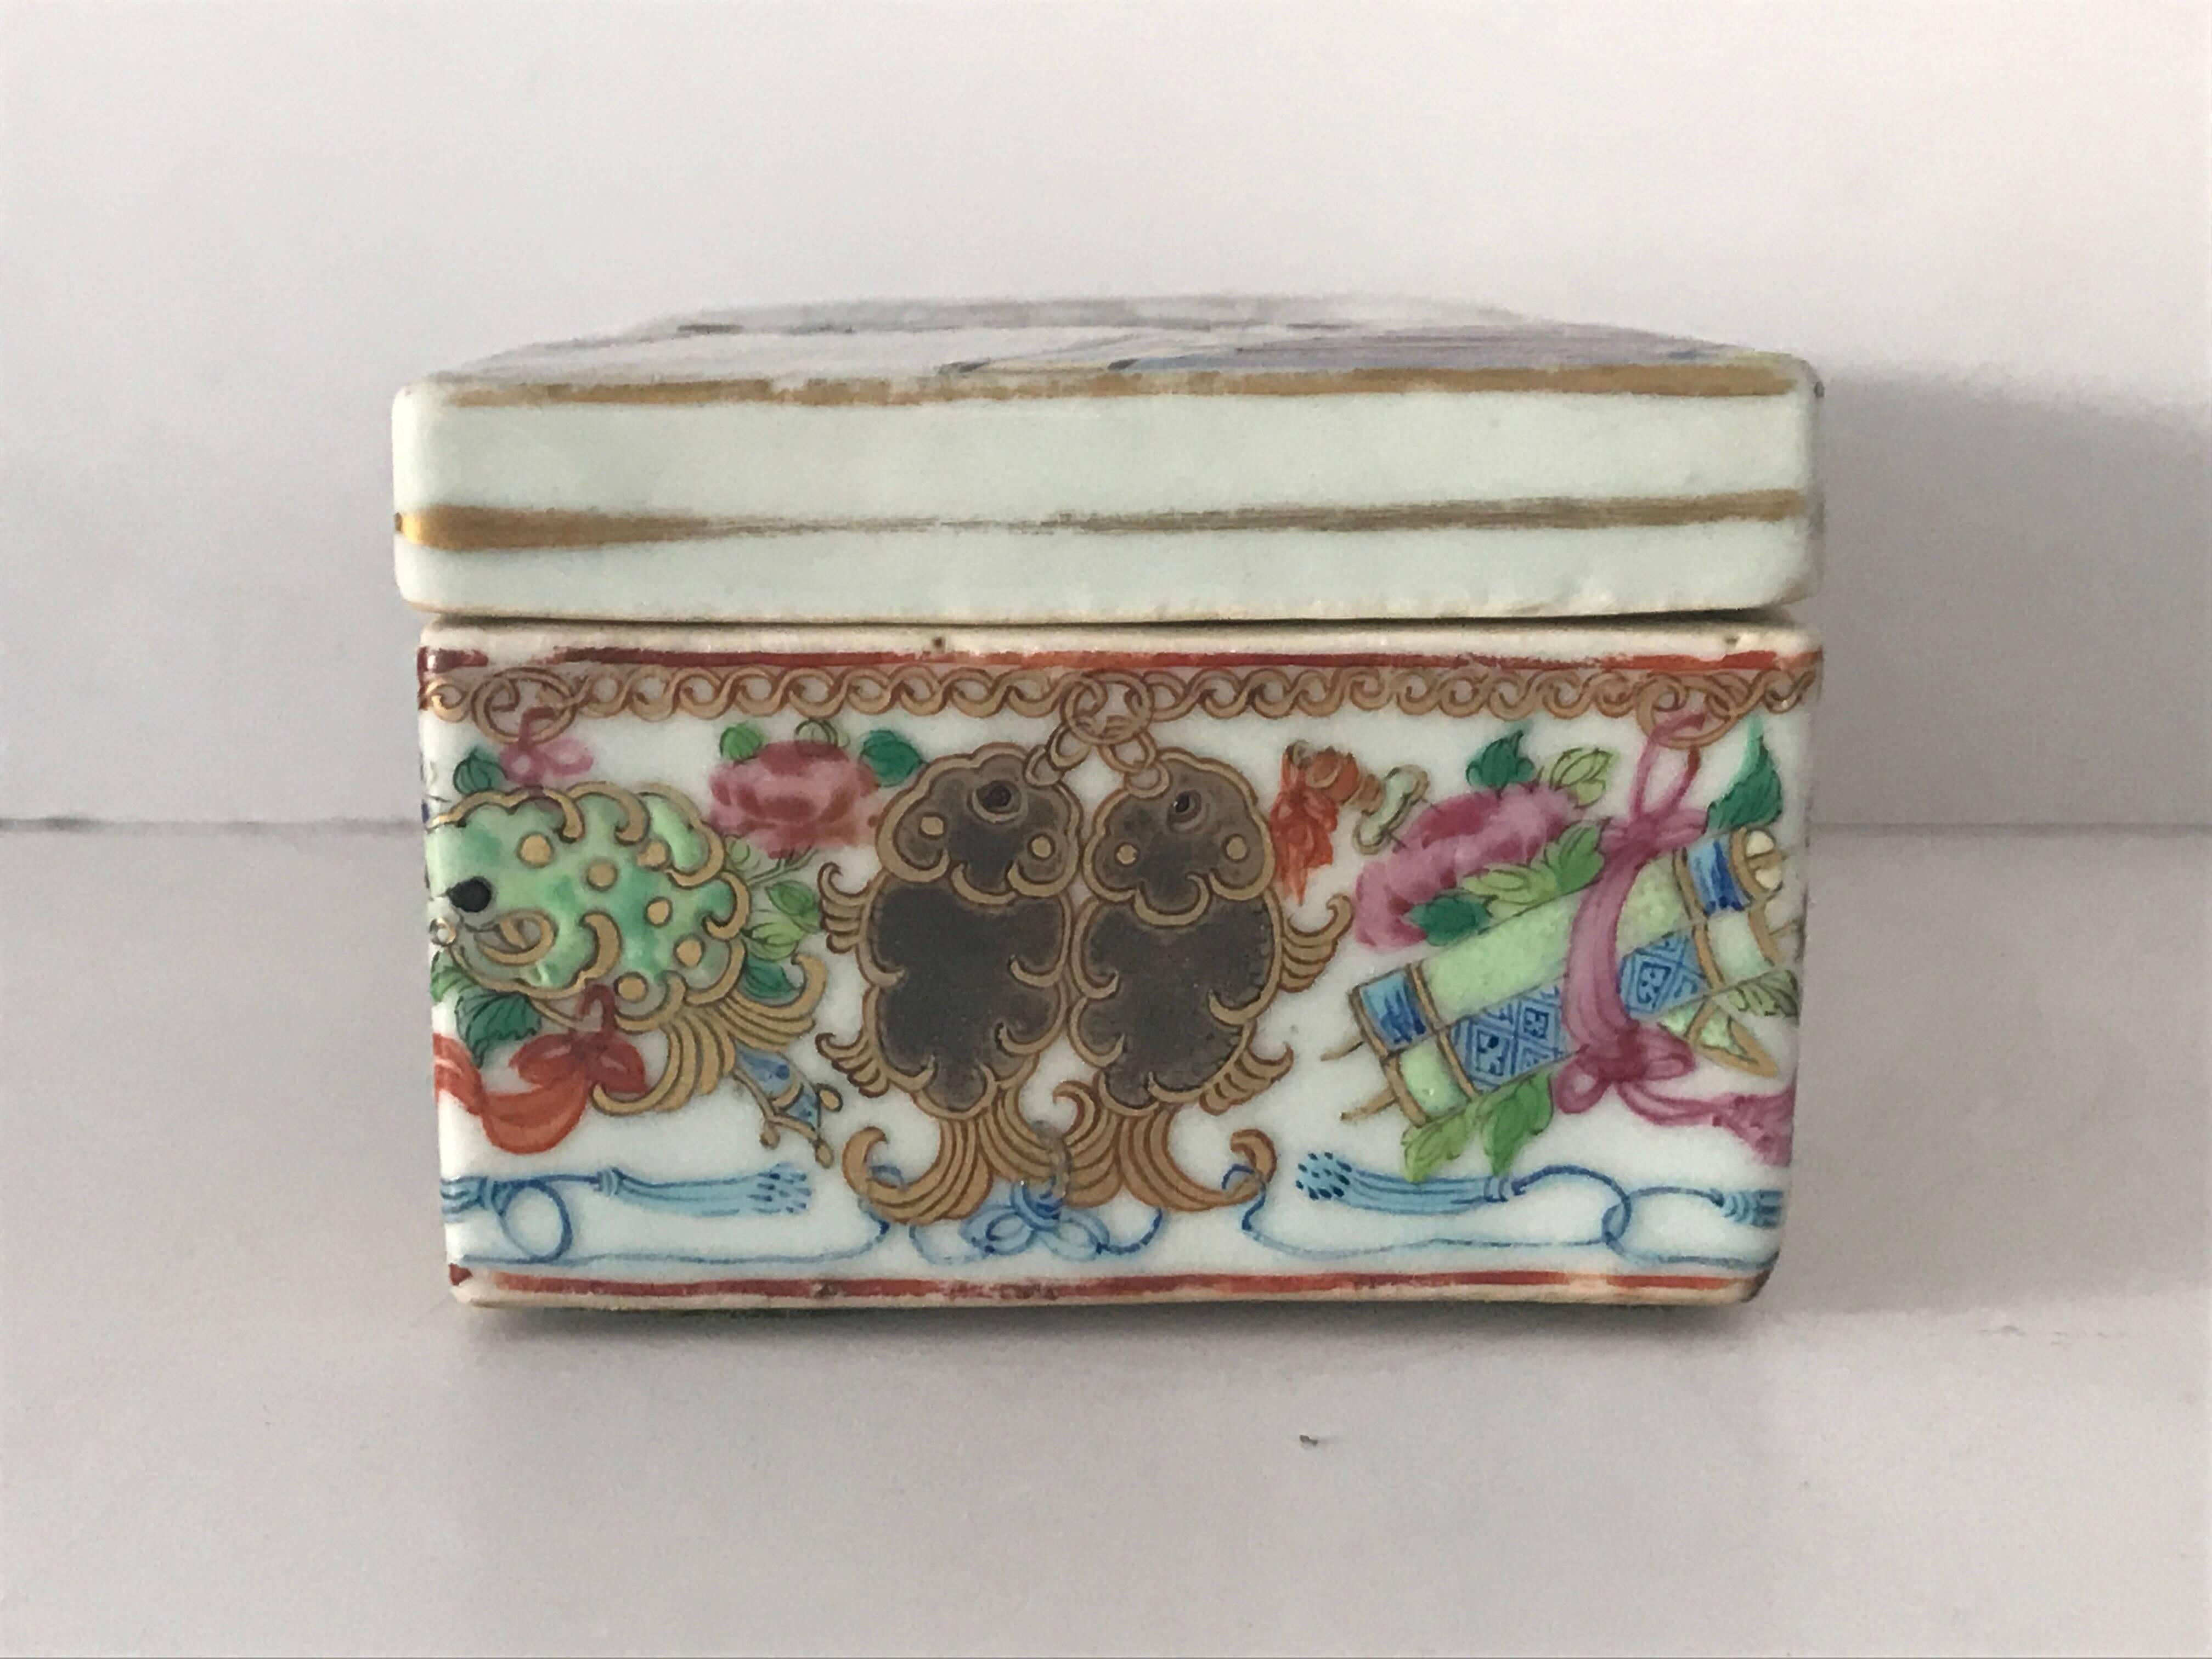 Porcelain Chinese Daoguang Reign Famille Rose Box with Cover   